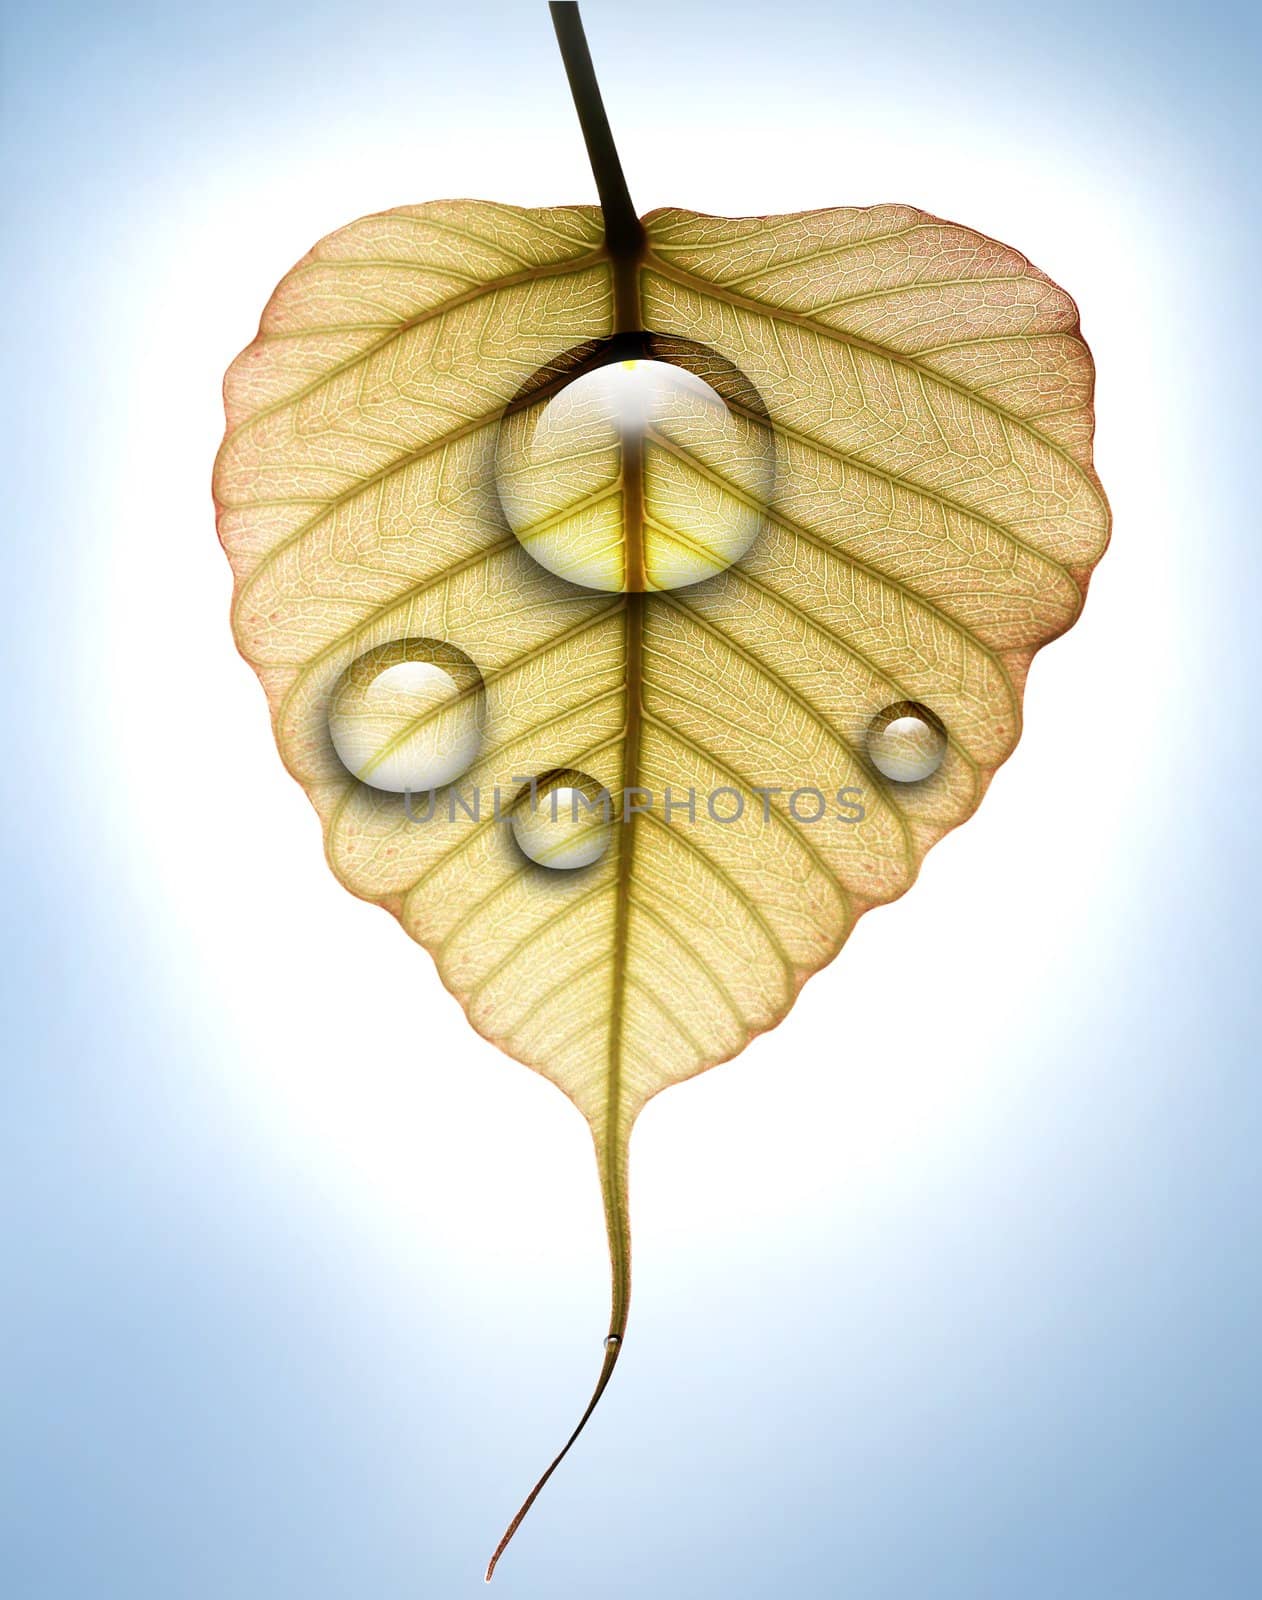 Young peepal leaf with water dew drops against brightly lit background